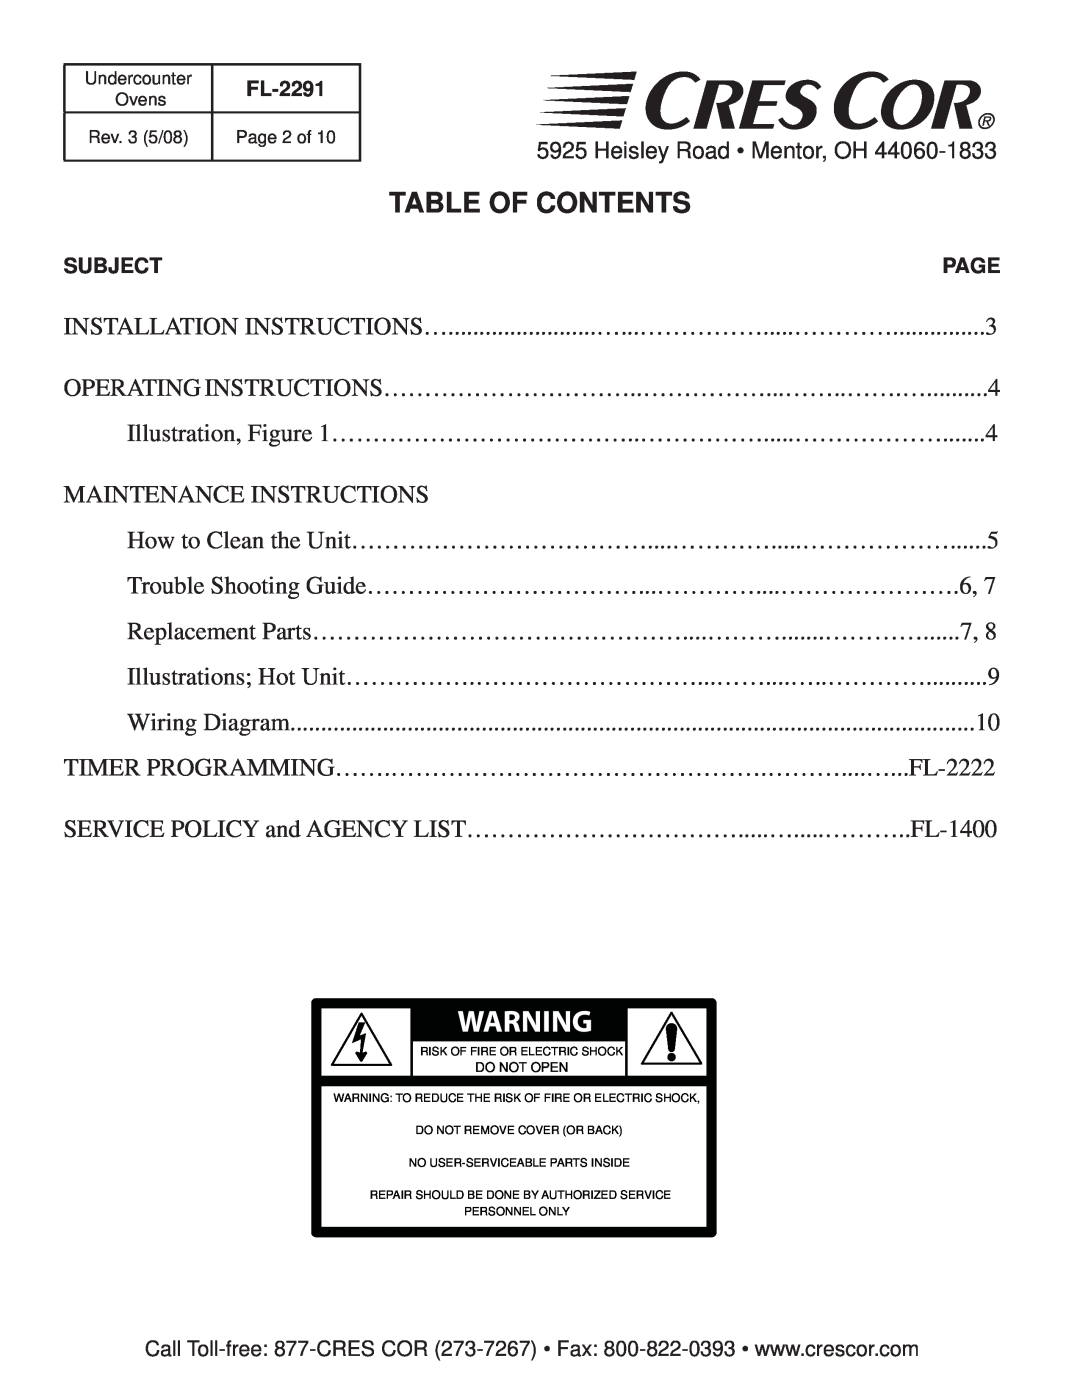 Cres Cor FL-2291 manual Table Of Contents, Maintenance Instructions 